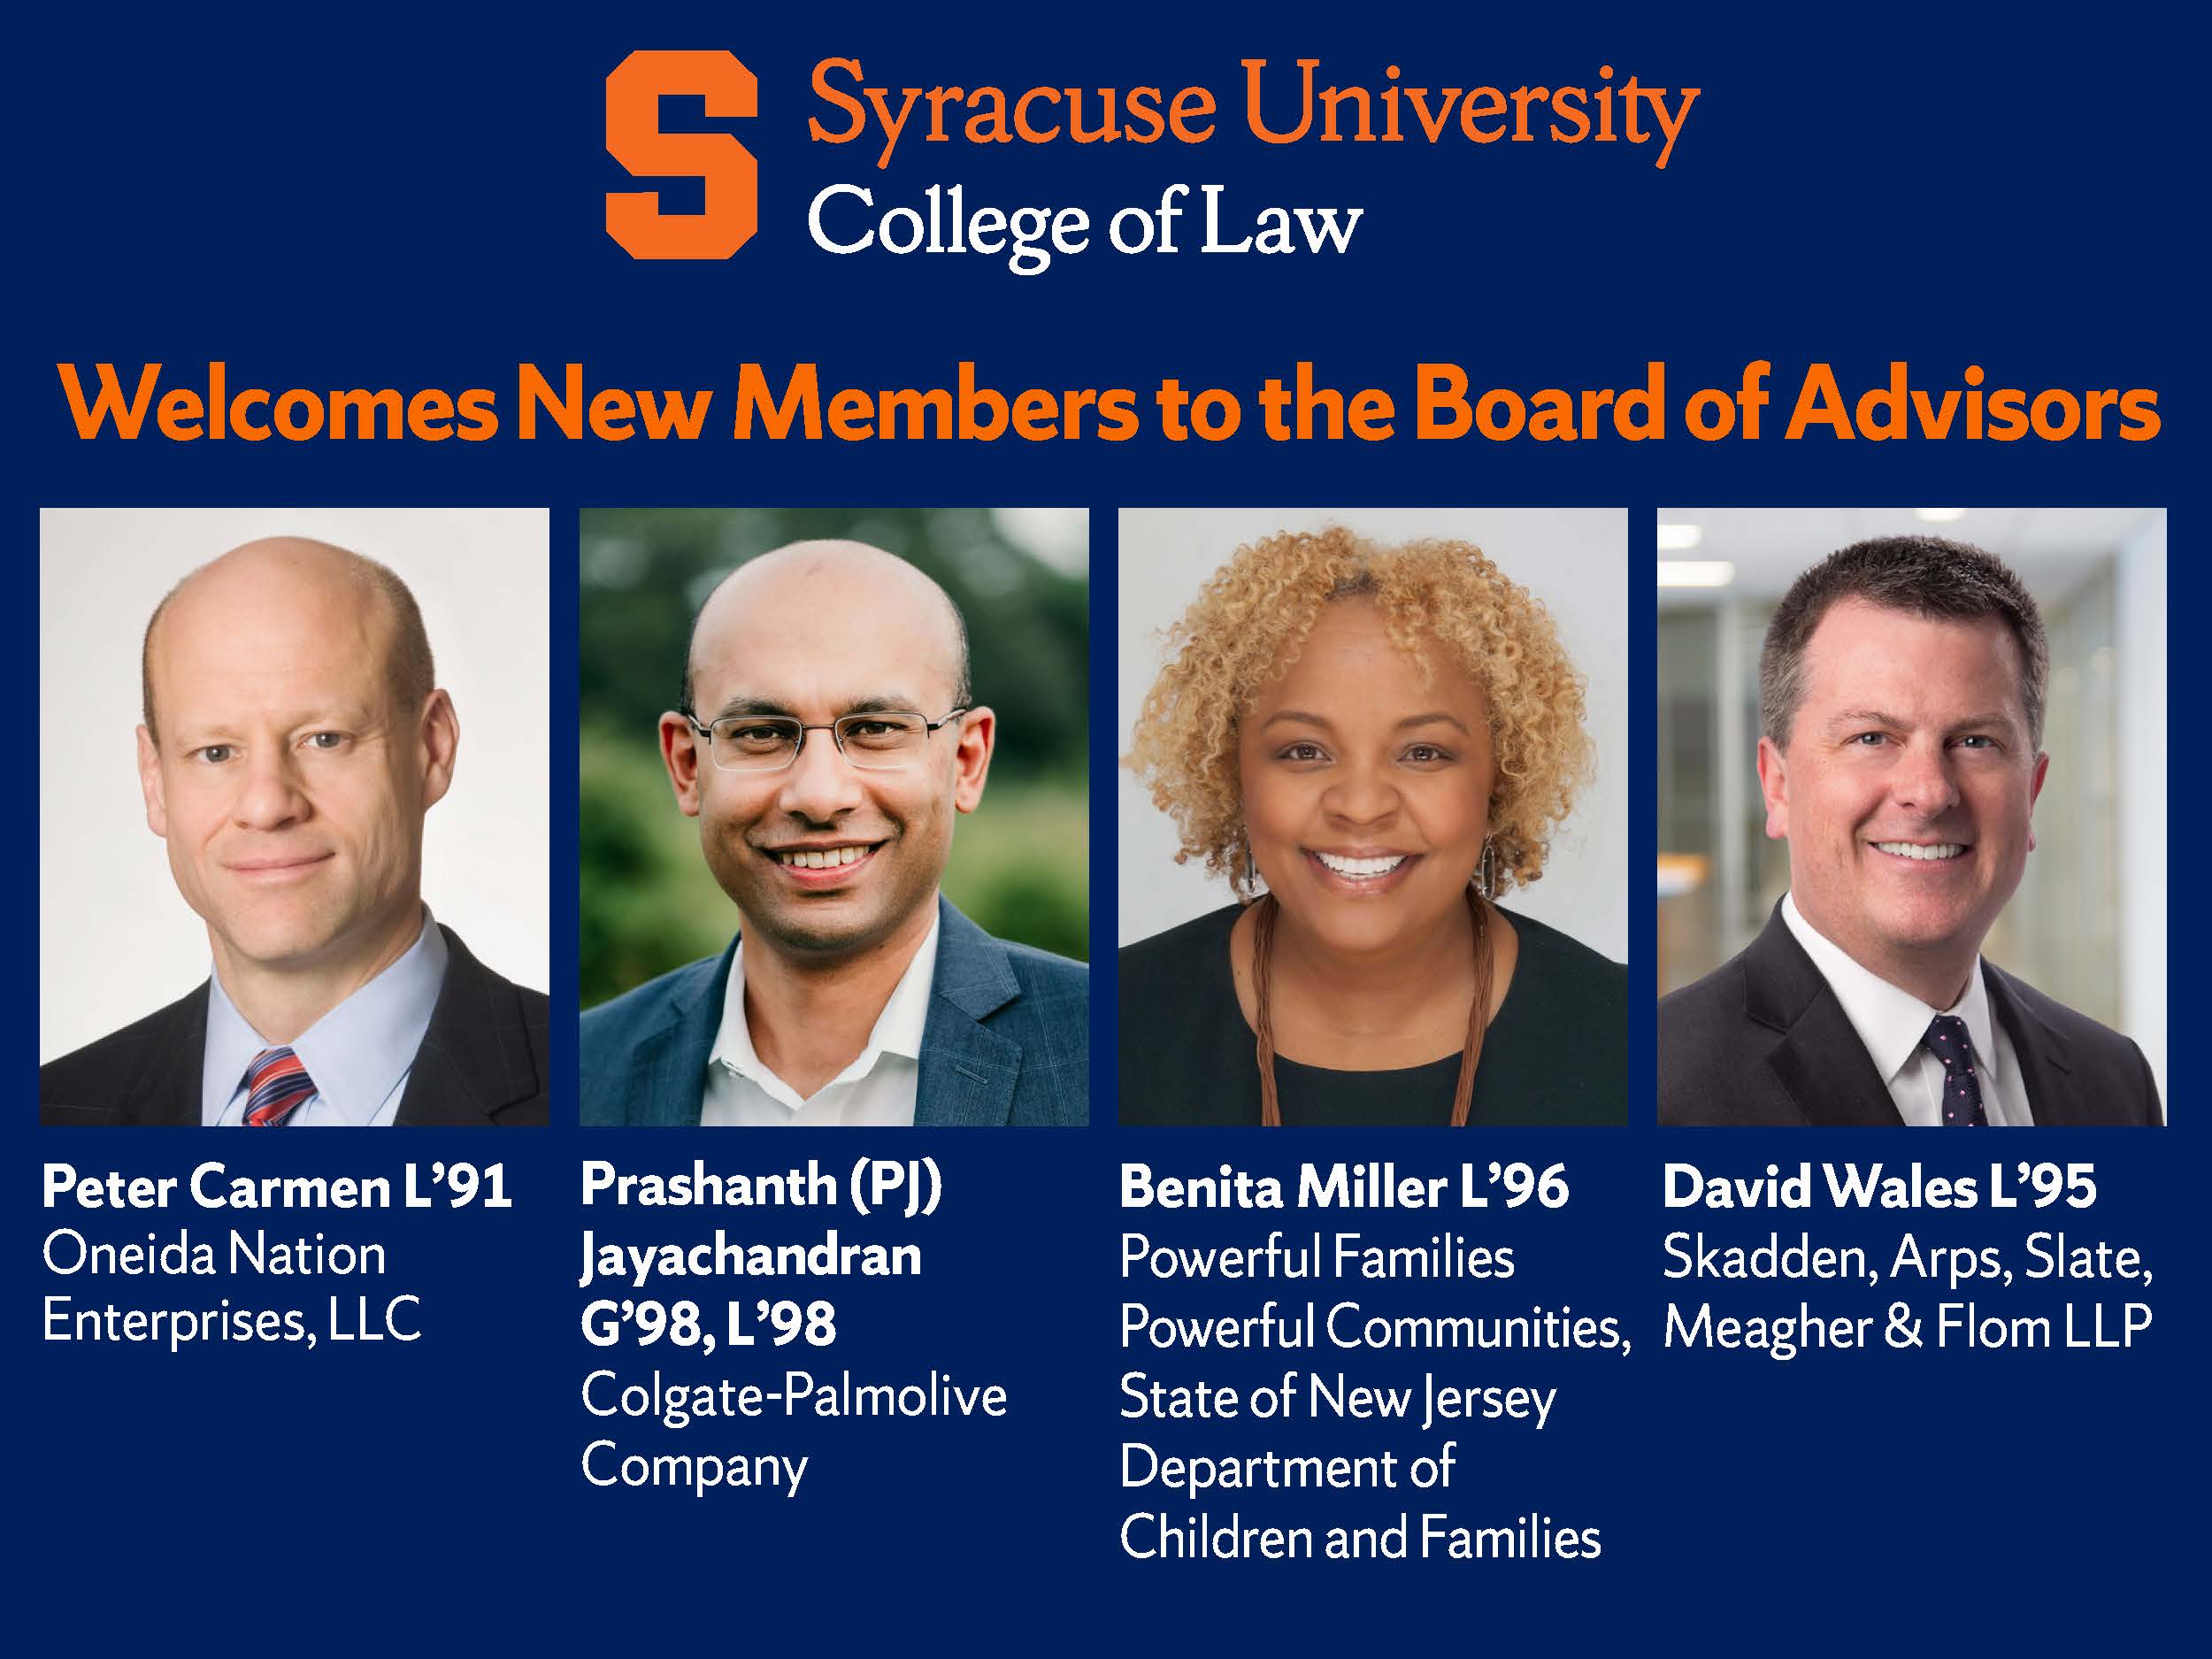 Syracuse University College of Law Welcomes New Members to the Board of Advisors; headshots for Peter Carmen L'91, Oneida Nation Enterprises, LLC; Prashanth (PJ) Jayachandran G'98, L'98, Colgate-Palmolive Company; Benita Miller L'96, Powerful Families Powerful Communities, State of New Jersey Department of Children and Families; David Wales L'95, Skadden, Arps, Slate Meagher & Flom LLP